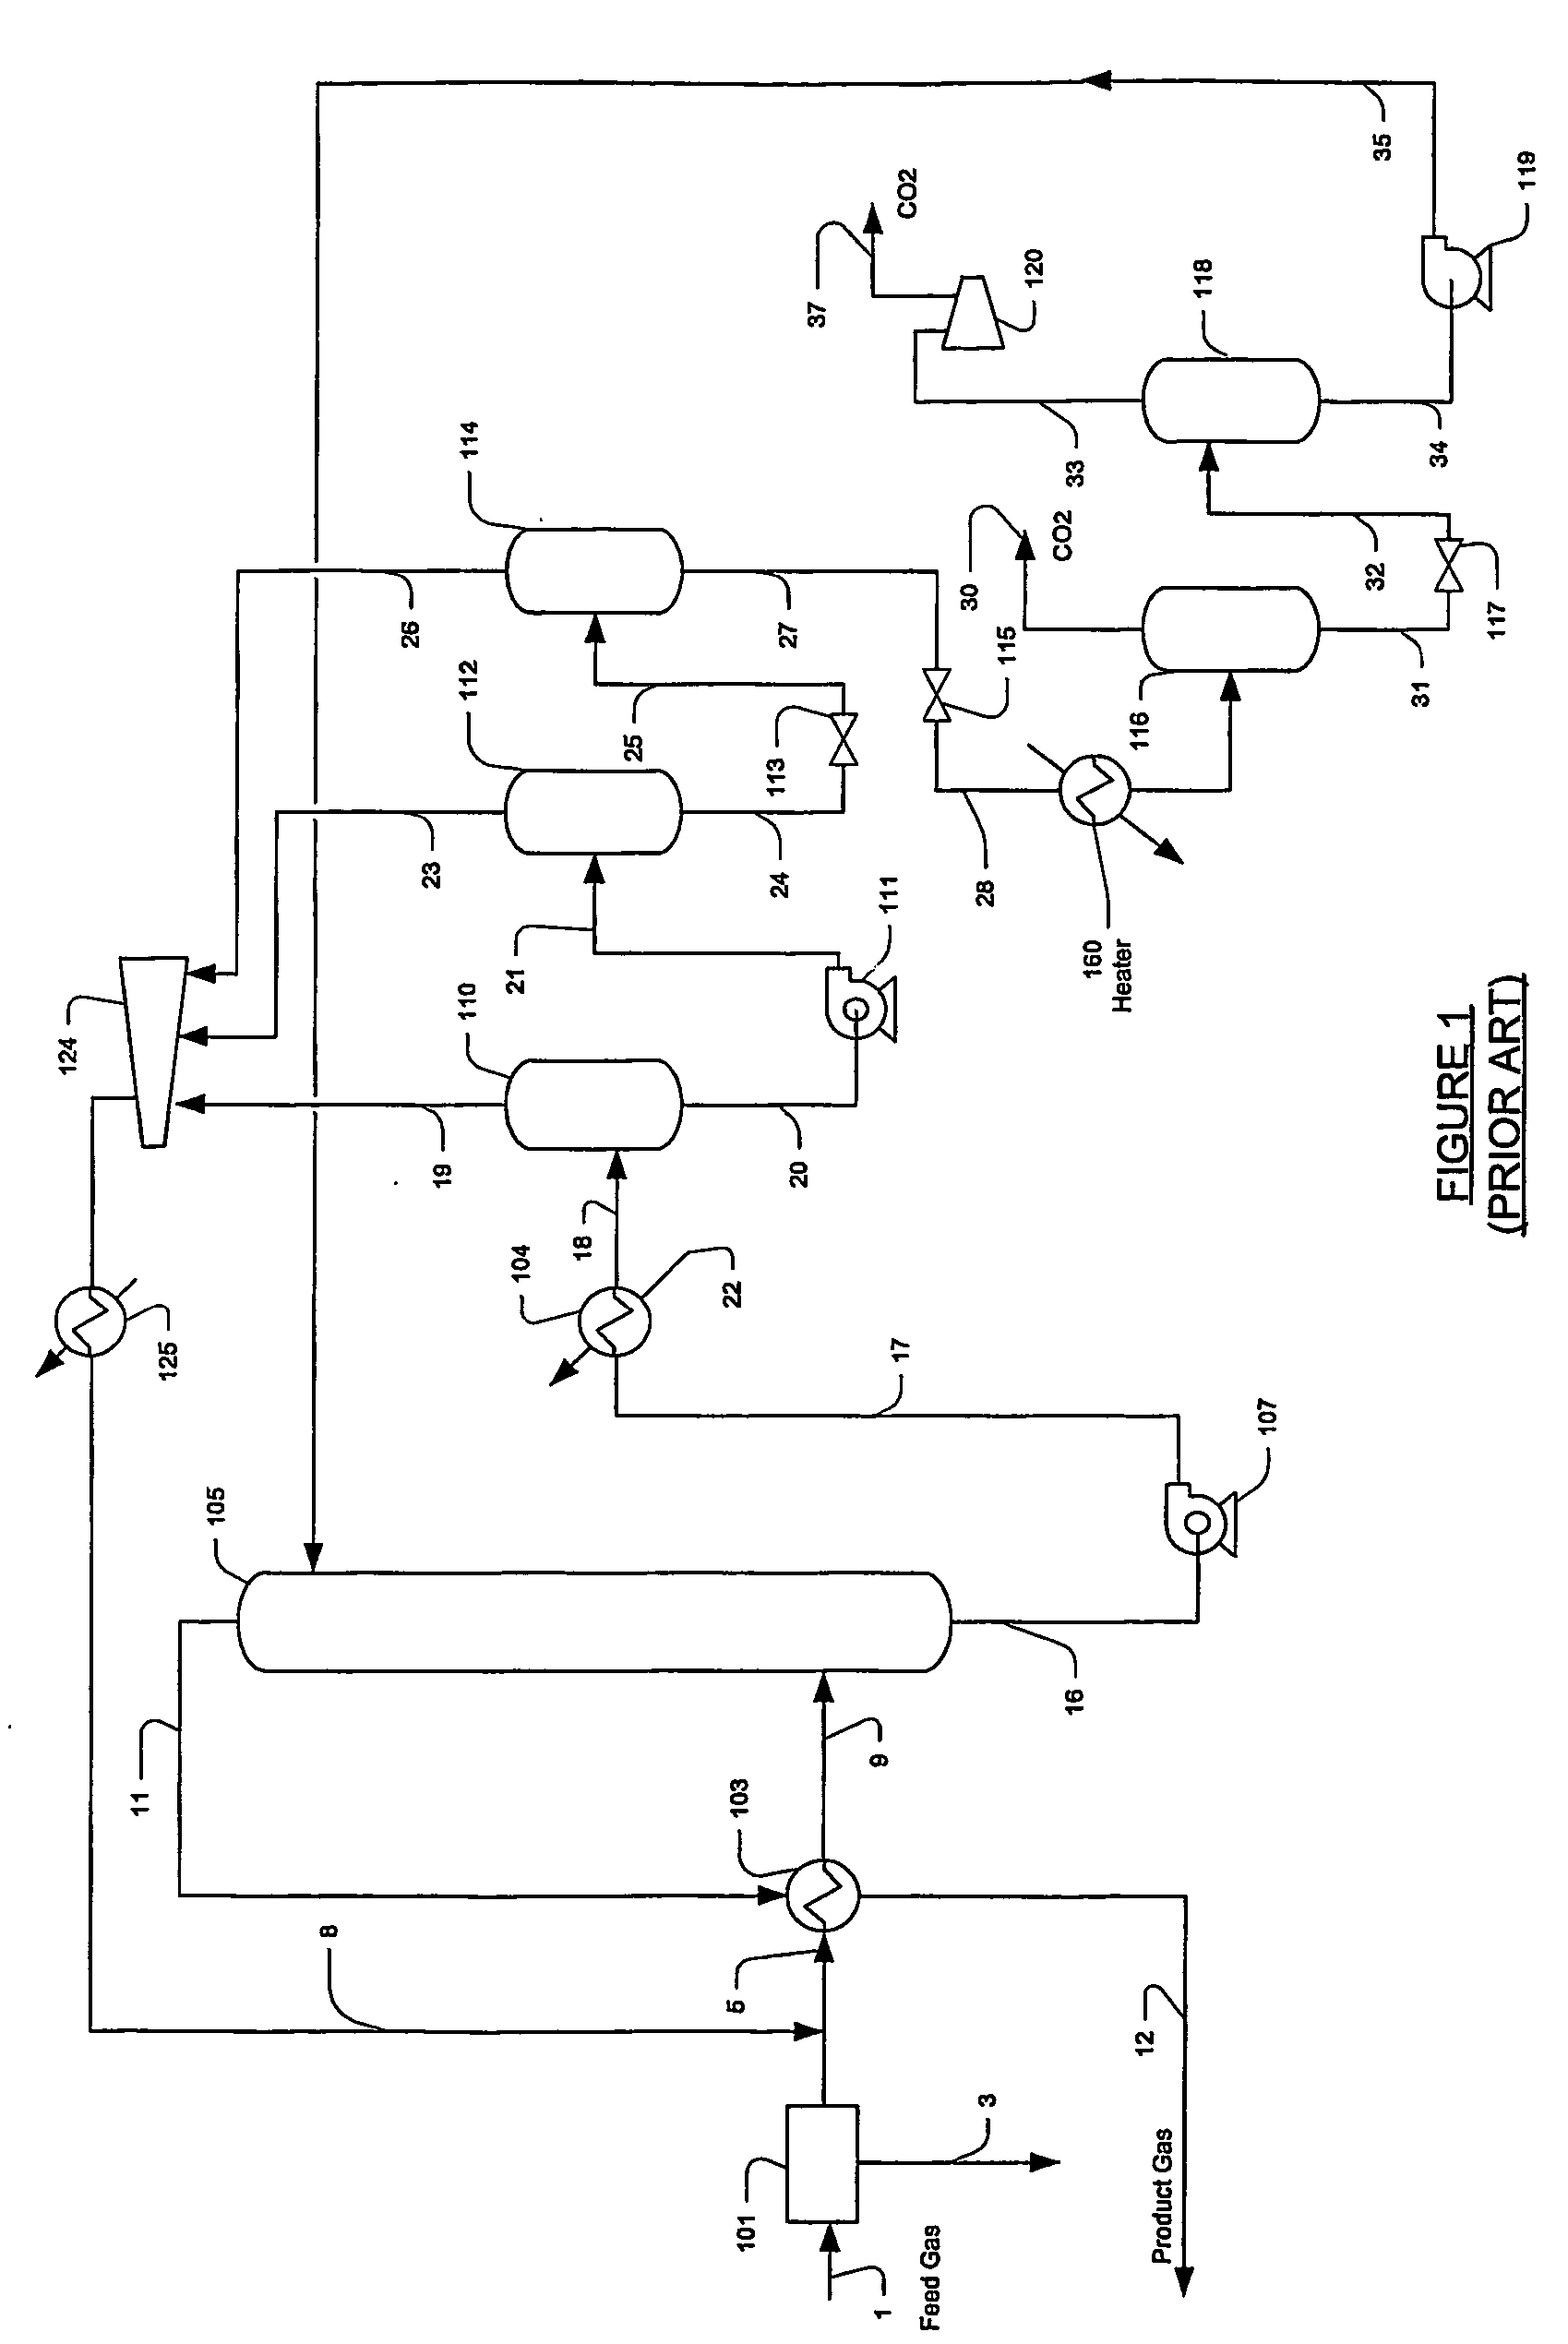 Configurations and methods of acid gas removal